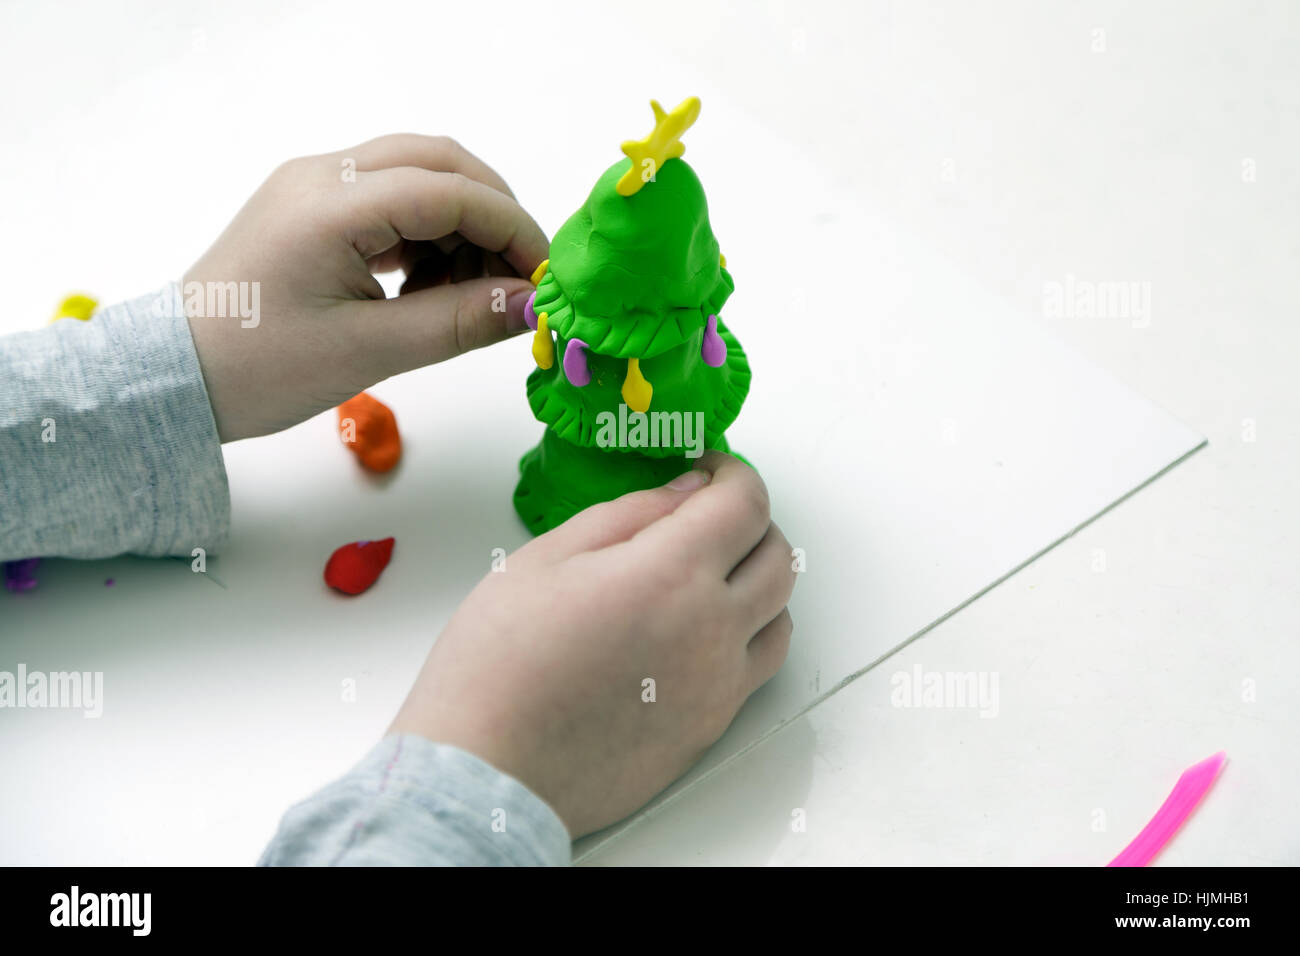 Children's hands mould a New Year tree from plasticine Stock Photo